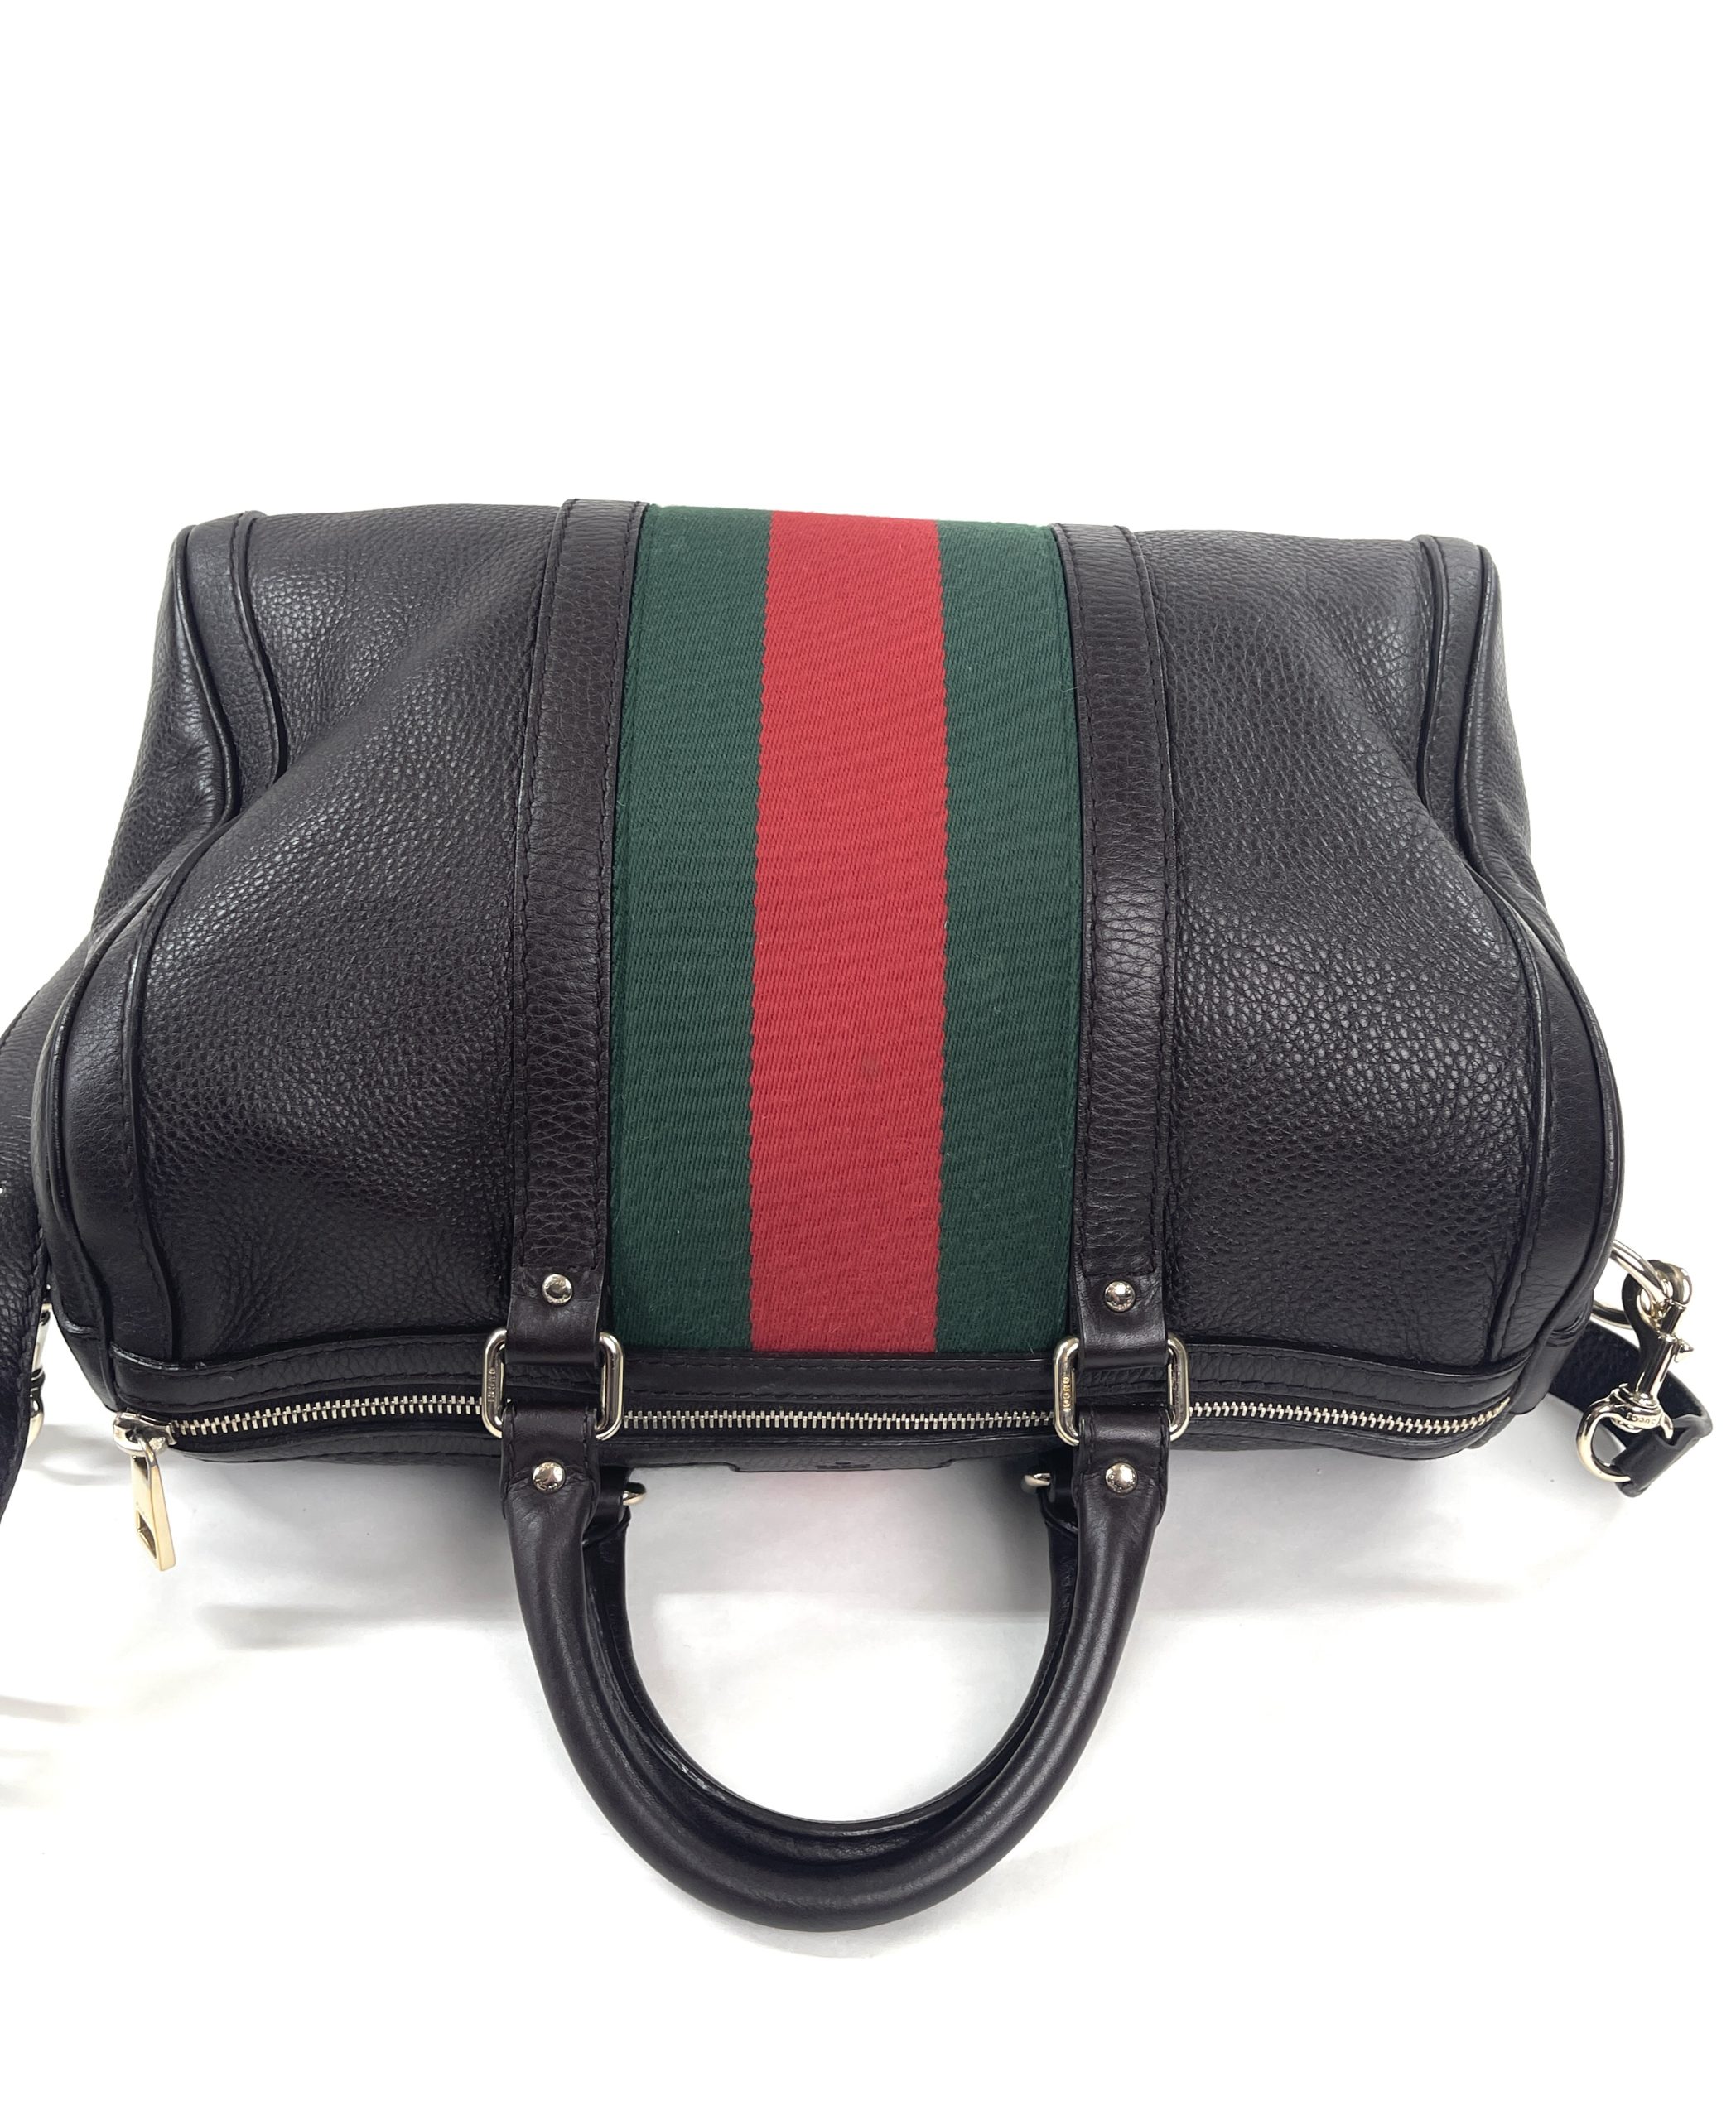 Bags from Gucci for Women in Gray